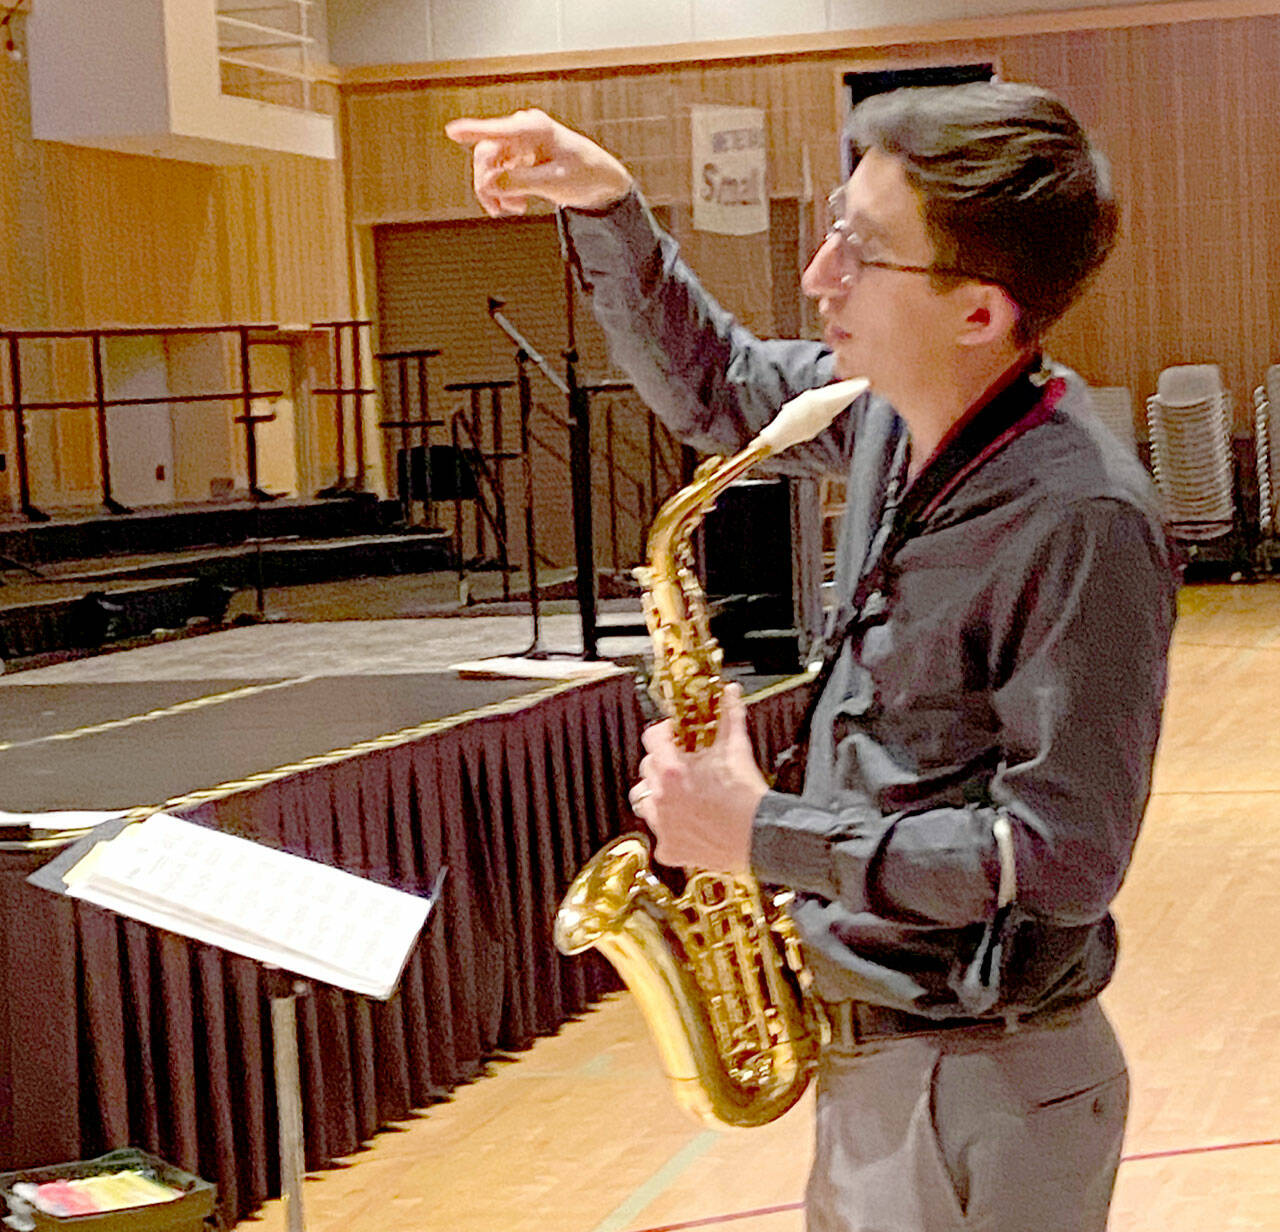 Tom Guenther is the musical director and lead alto saxophone of the Stardust Big Band.